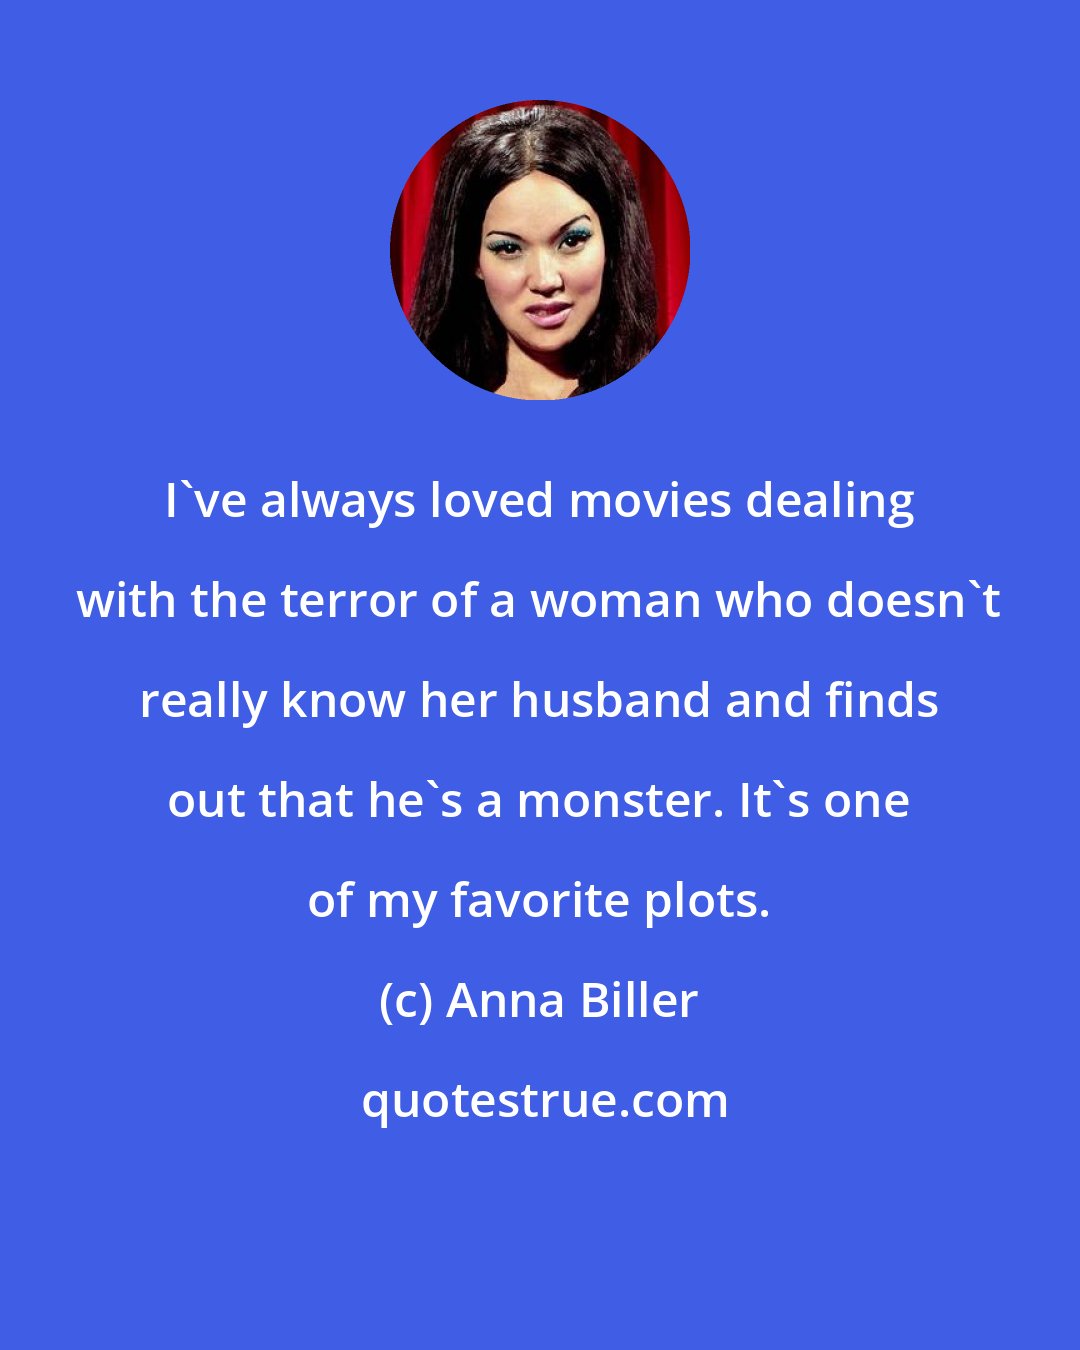 Anna Biller: I've always loved movies dealing with the terror of a woman who doesn't really know her husband and finds out that he's a monster. It's one of my favorite plots.